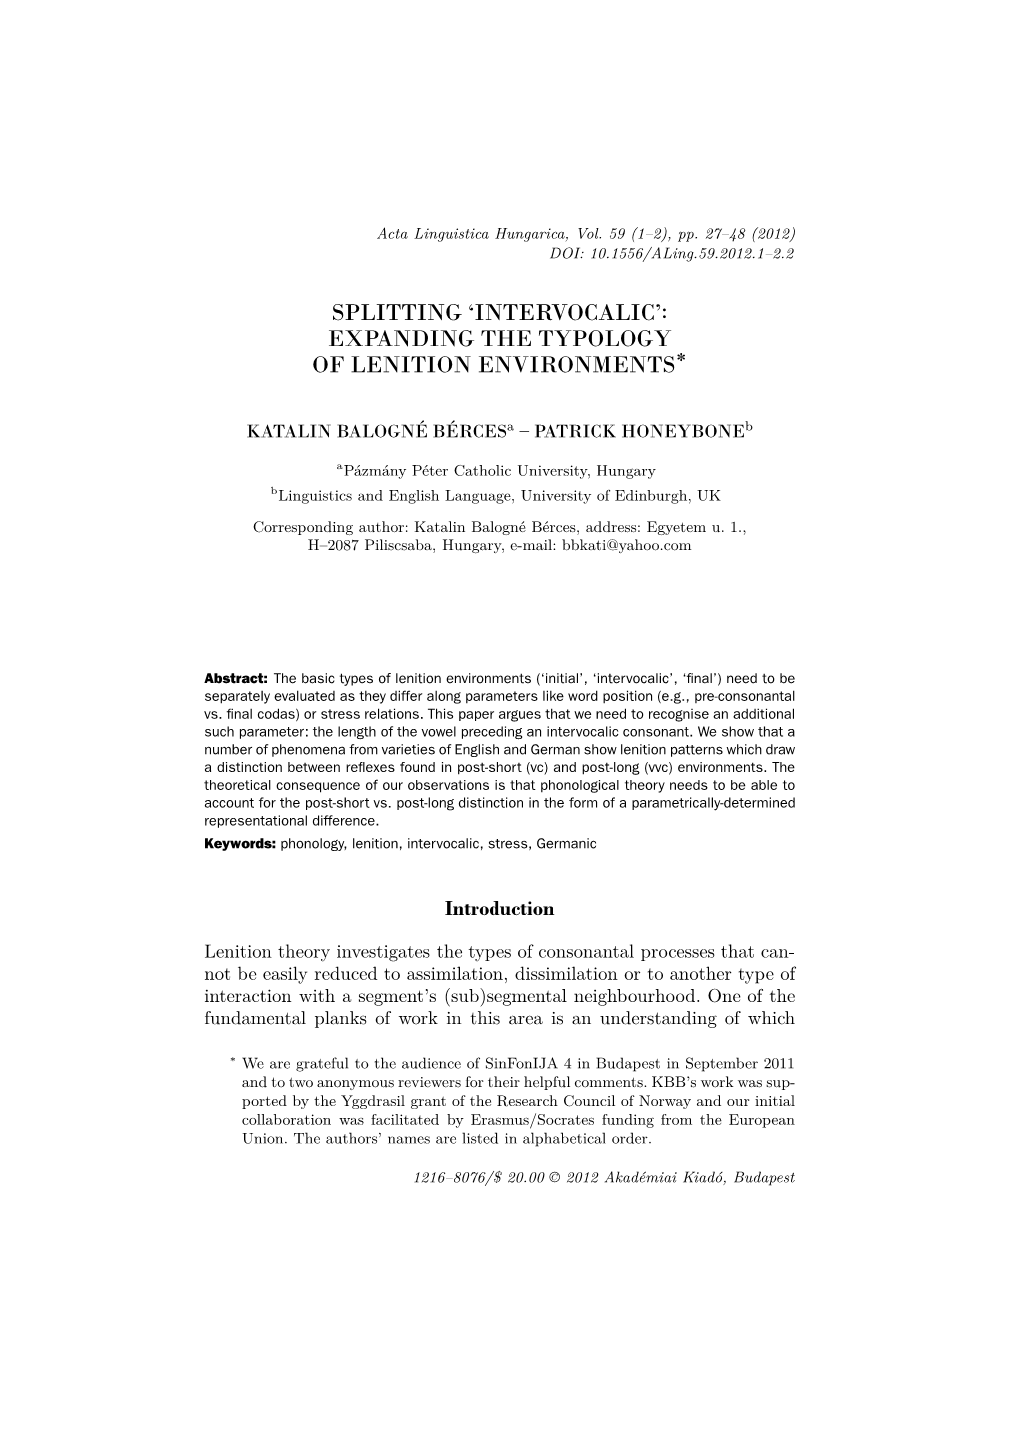 Intervocalic’: Expanding the Typology of Lenition Environments*